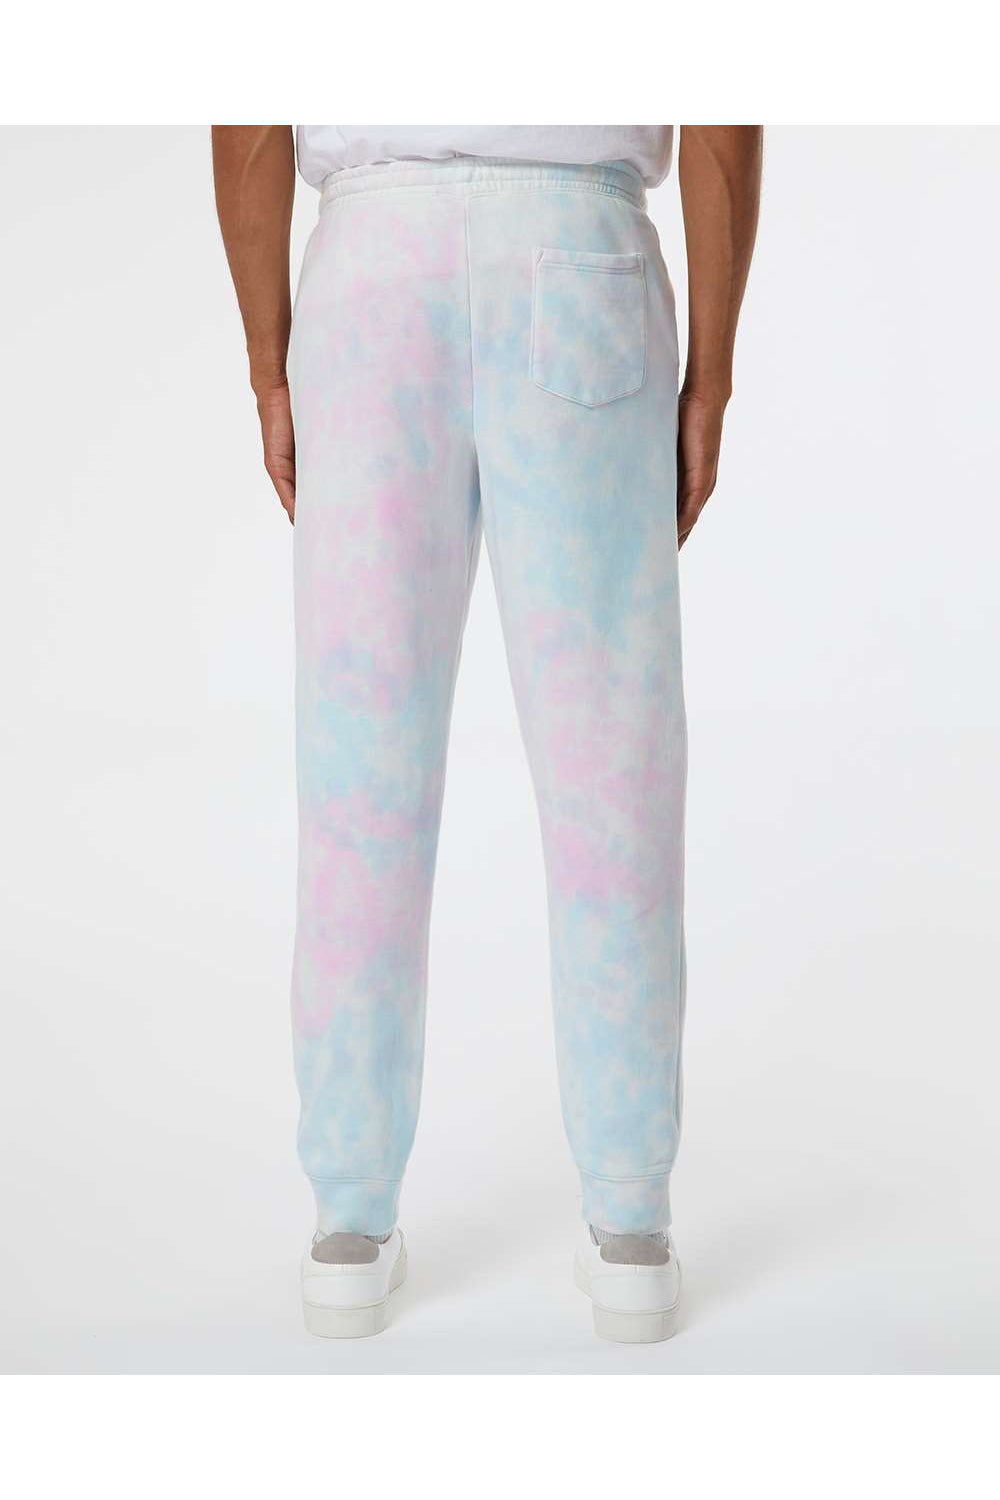 Independent Trading Co. PRM50PTTD Mens Tie-Dye Fleece Sweatpants w/ Pockets Cotton Candy Model Back